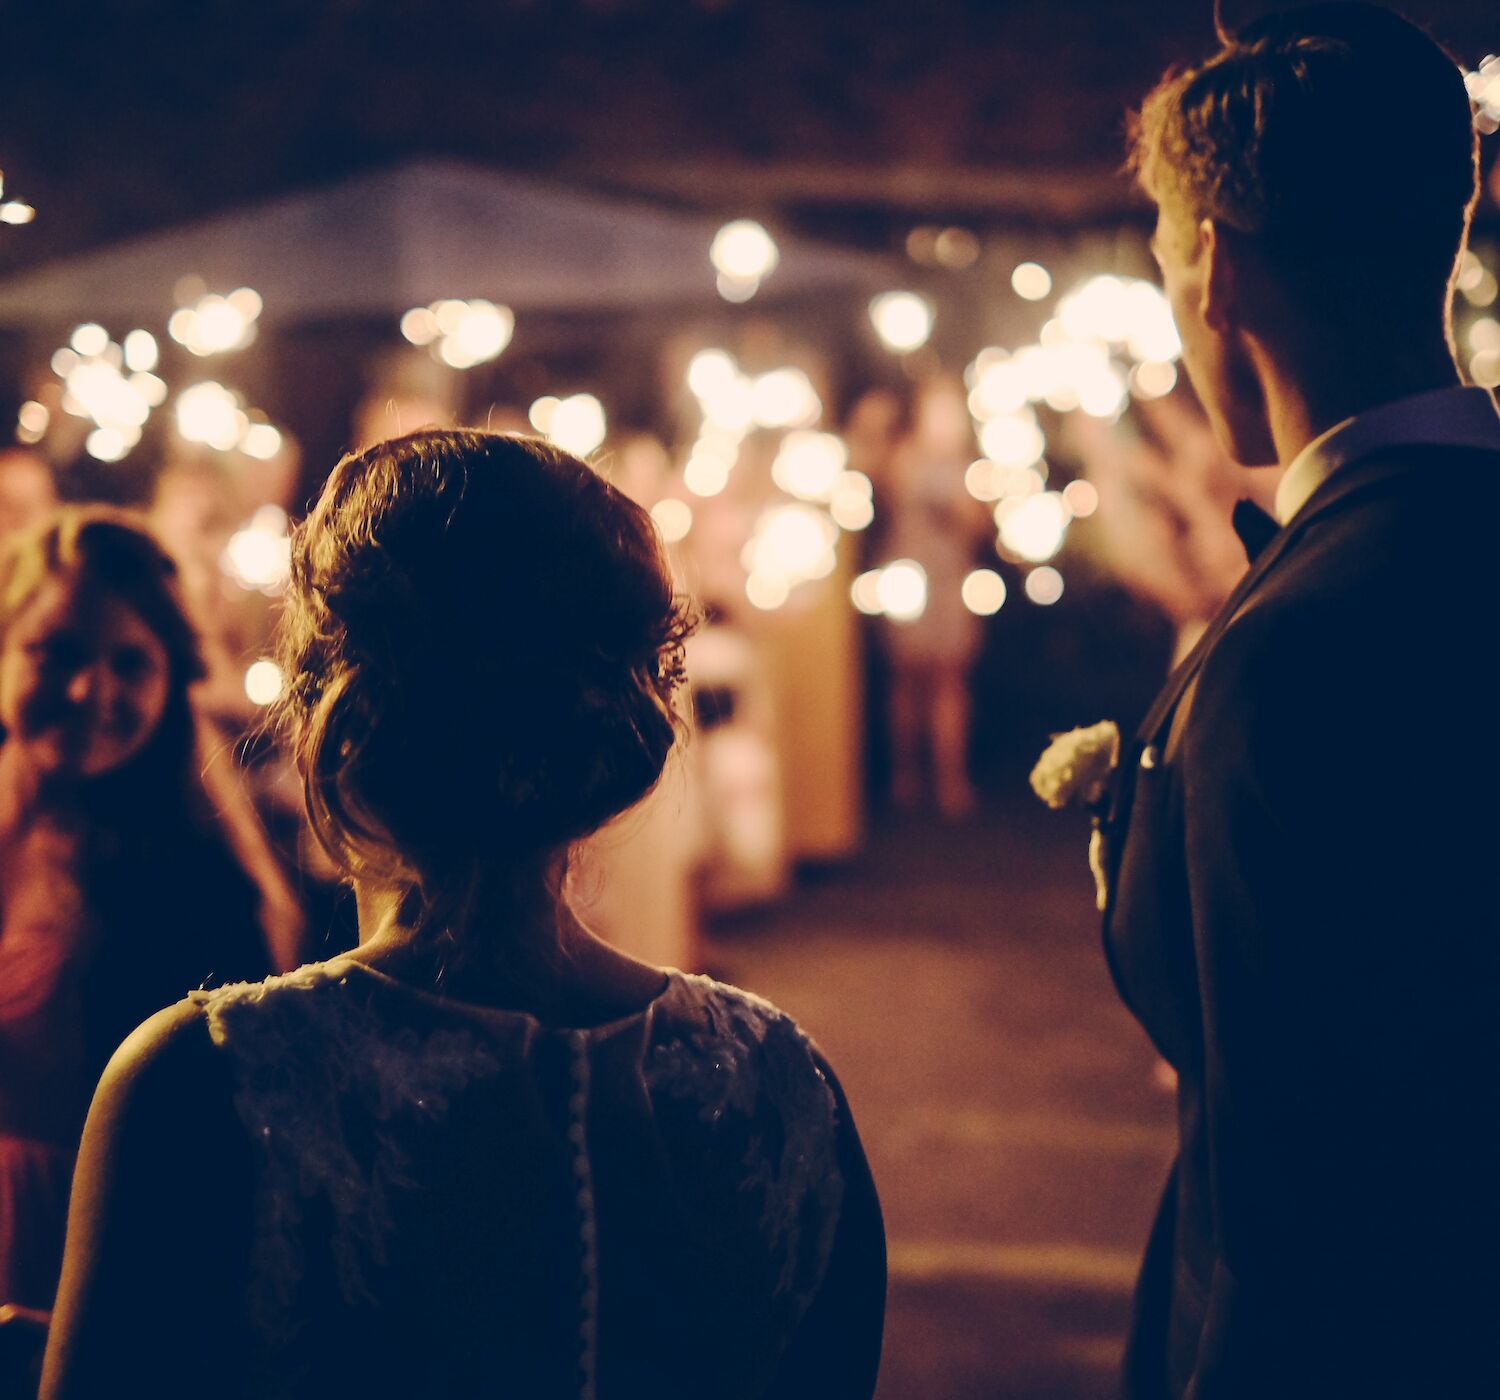 A couple in formal attire is facing a crowd at night. The crowd holds sparklers, creating a festive, warm atmosphere, possibly at a celebration.